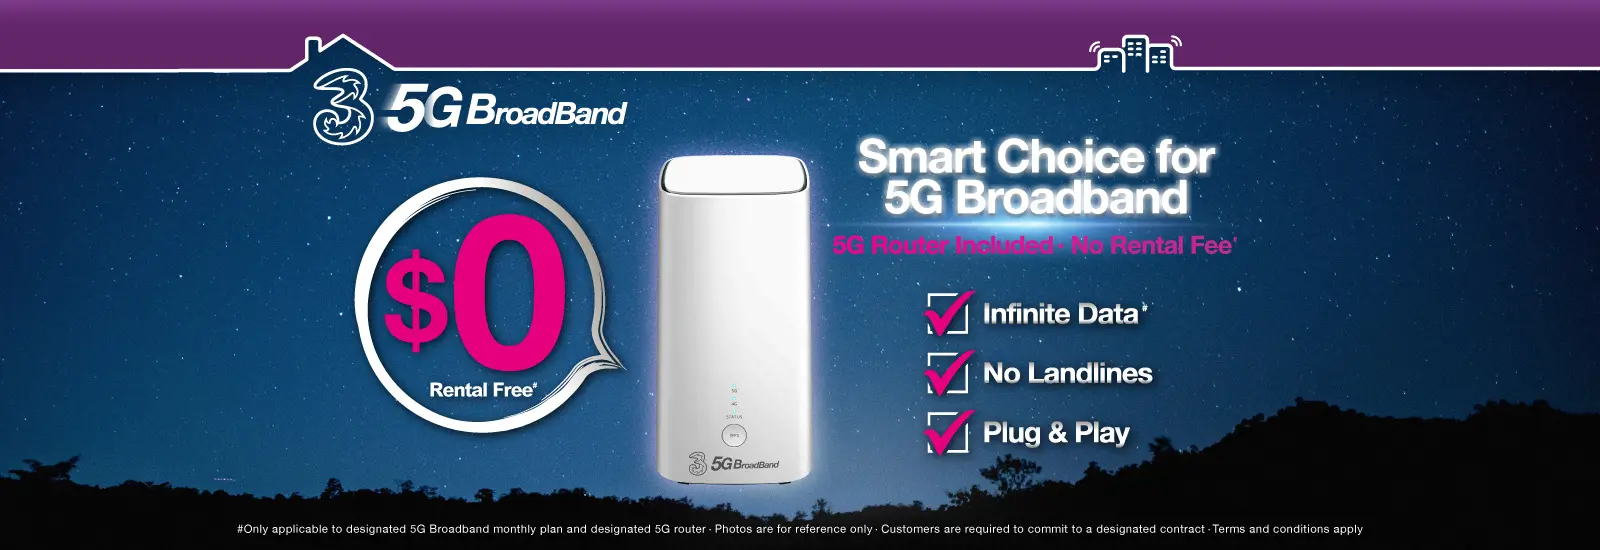 5G Broadband limited offer exclusively for Public Housing Estates and Home Ownership Scheme households! Get Infinite 5G Broadband data with Selected 5G Wi-Fi 6 Router for a monthly fee of $88!